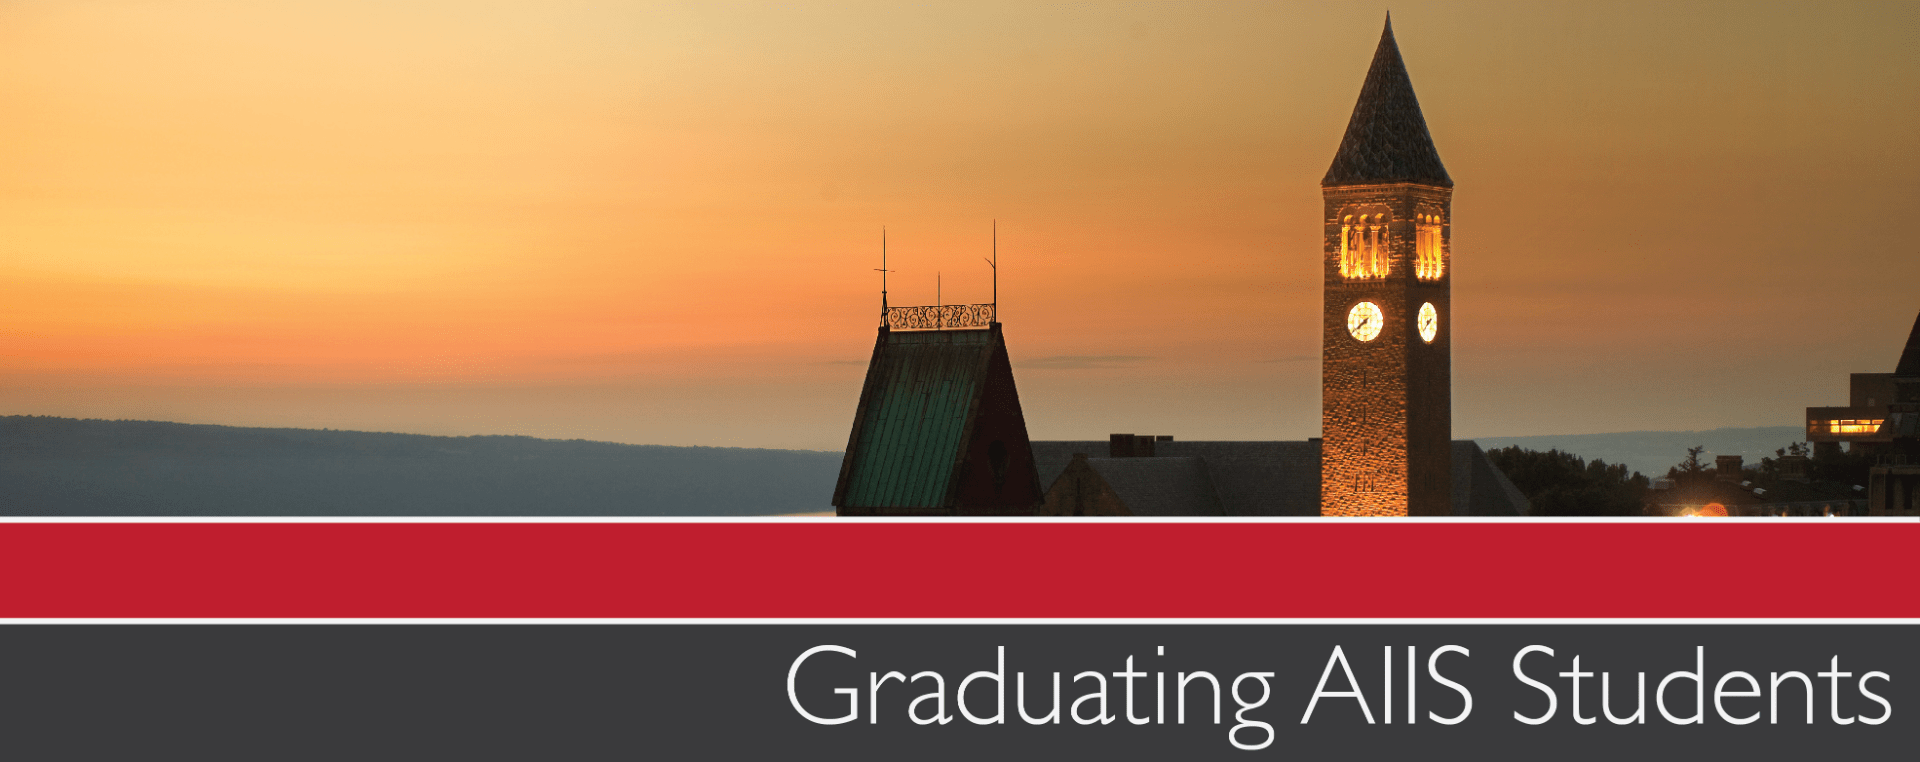 Banner with picture of Cornell's clocktower with text saying graduating AIIS students.